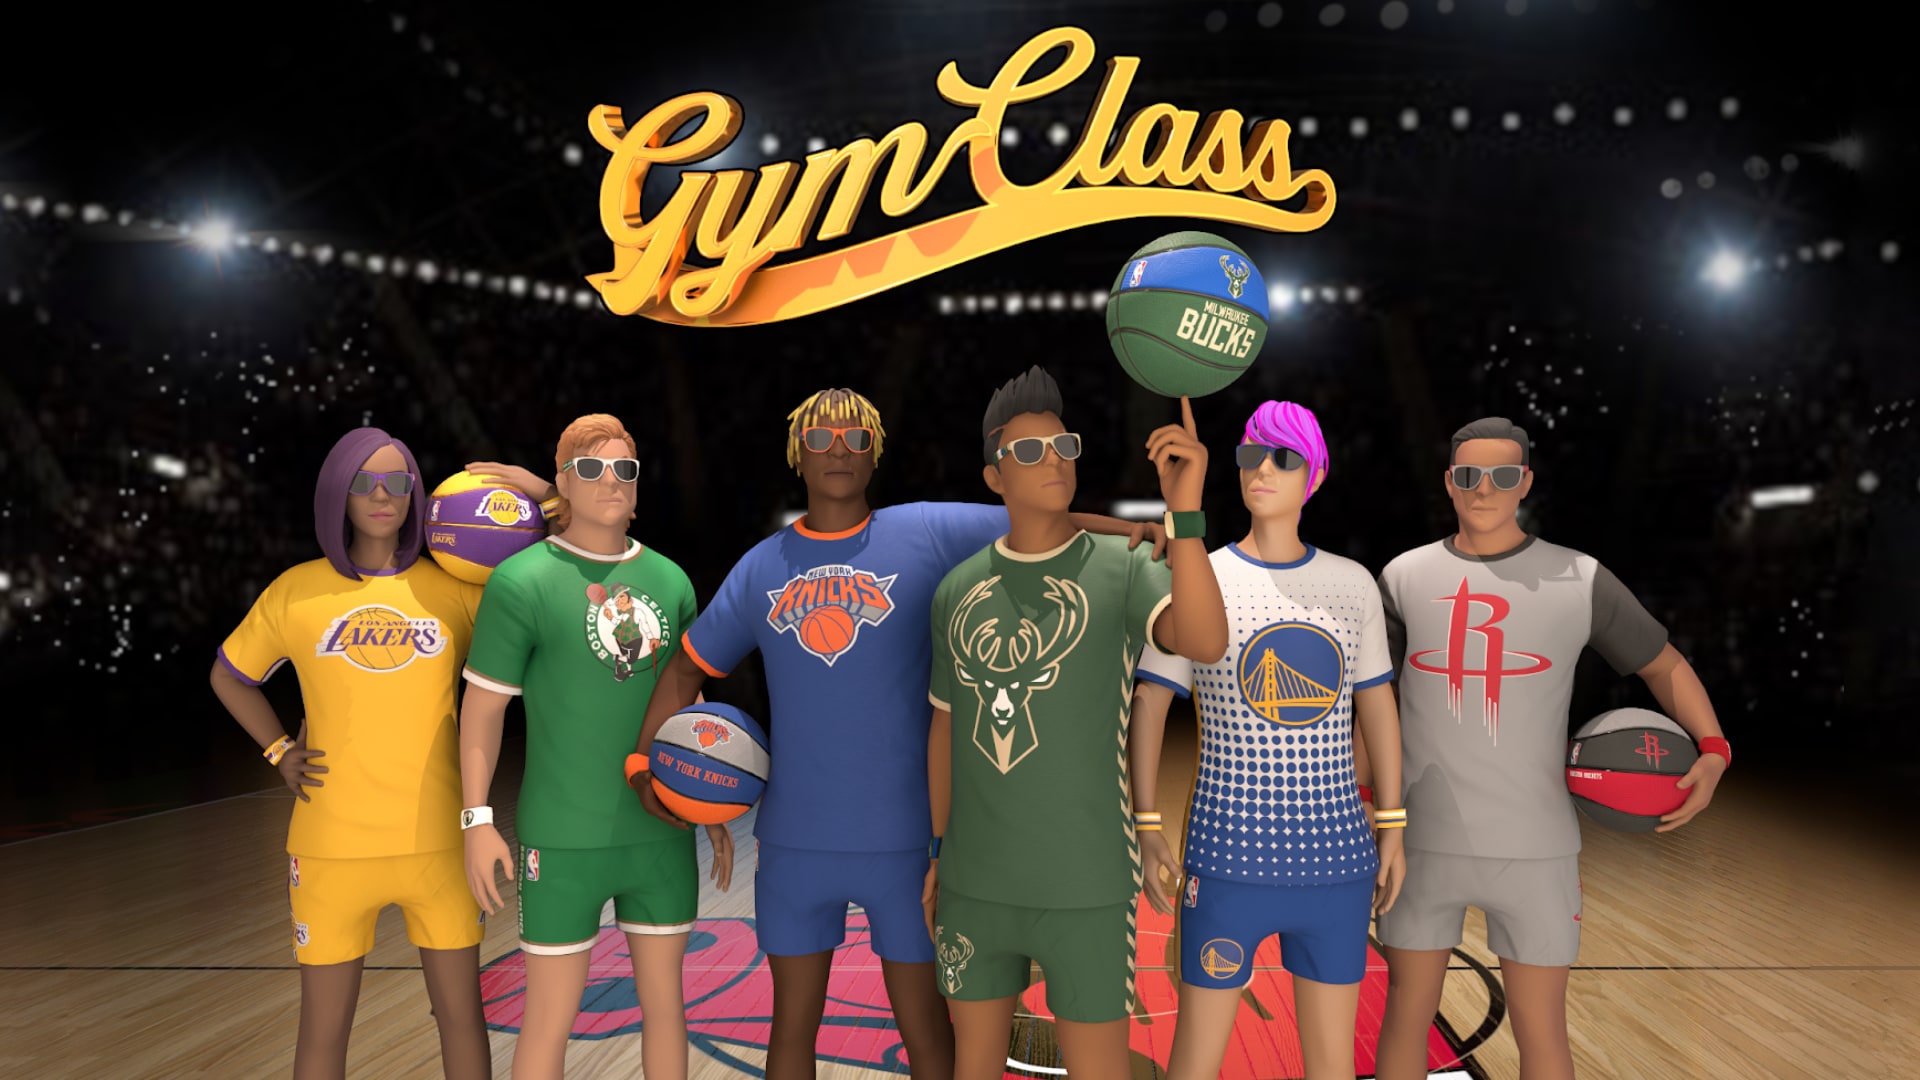 Shoot hoops on your favorite NBA court in Gym Class VR